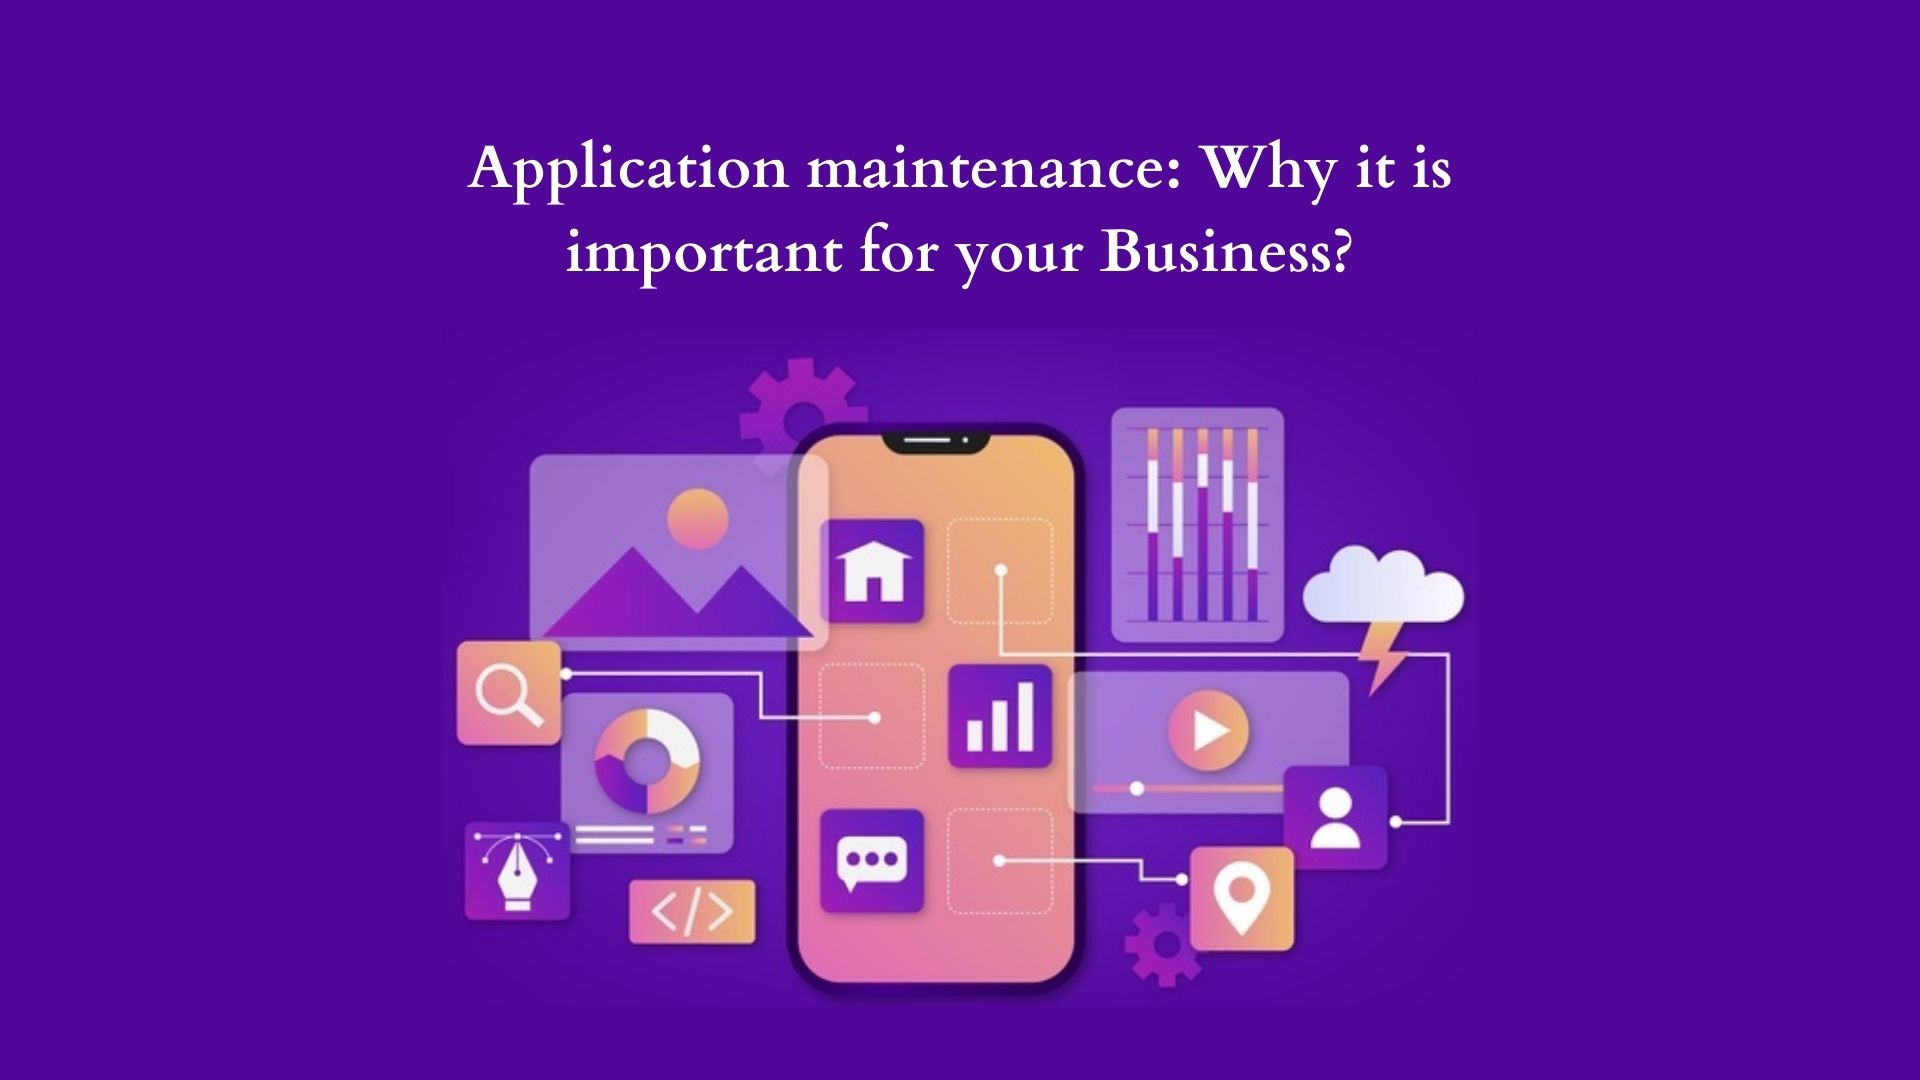 Application maintenance: Why it is important for your Business